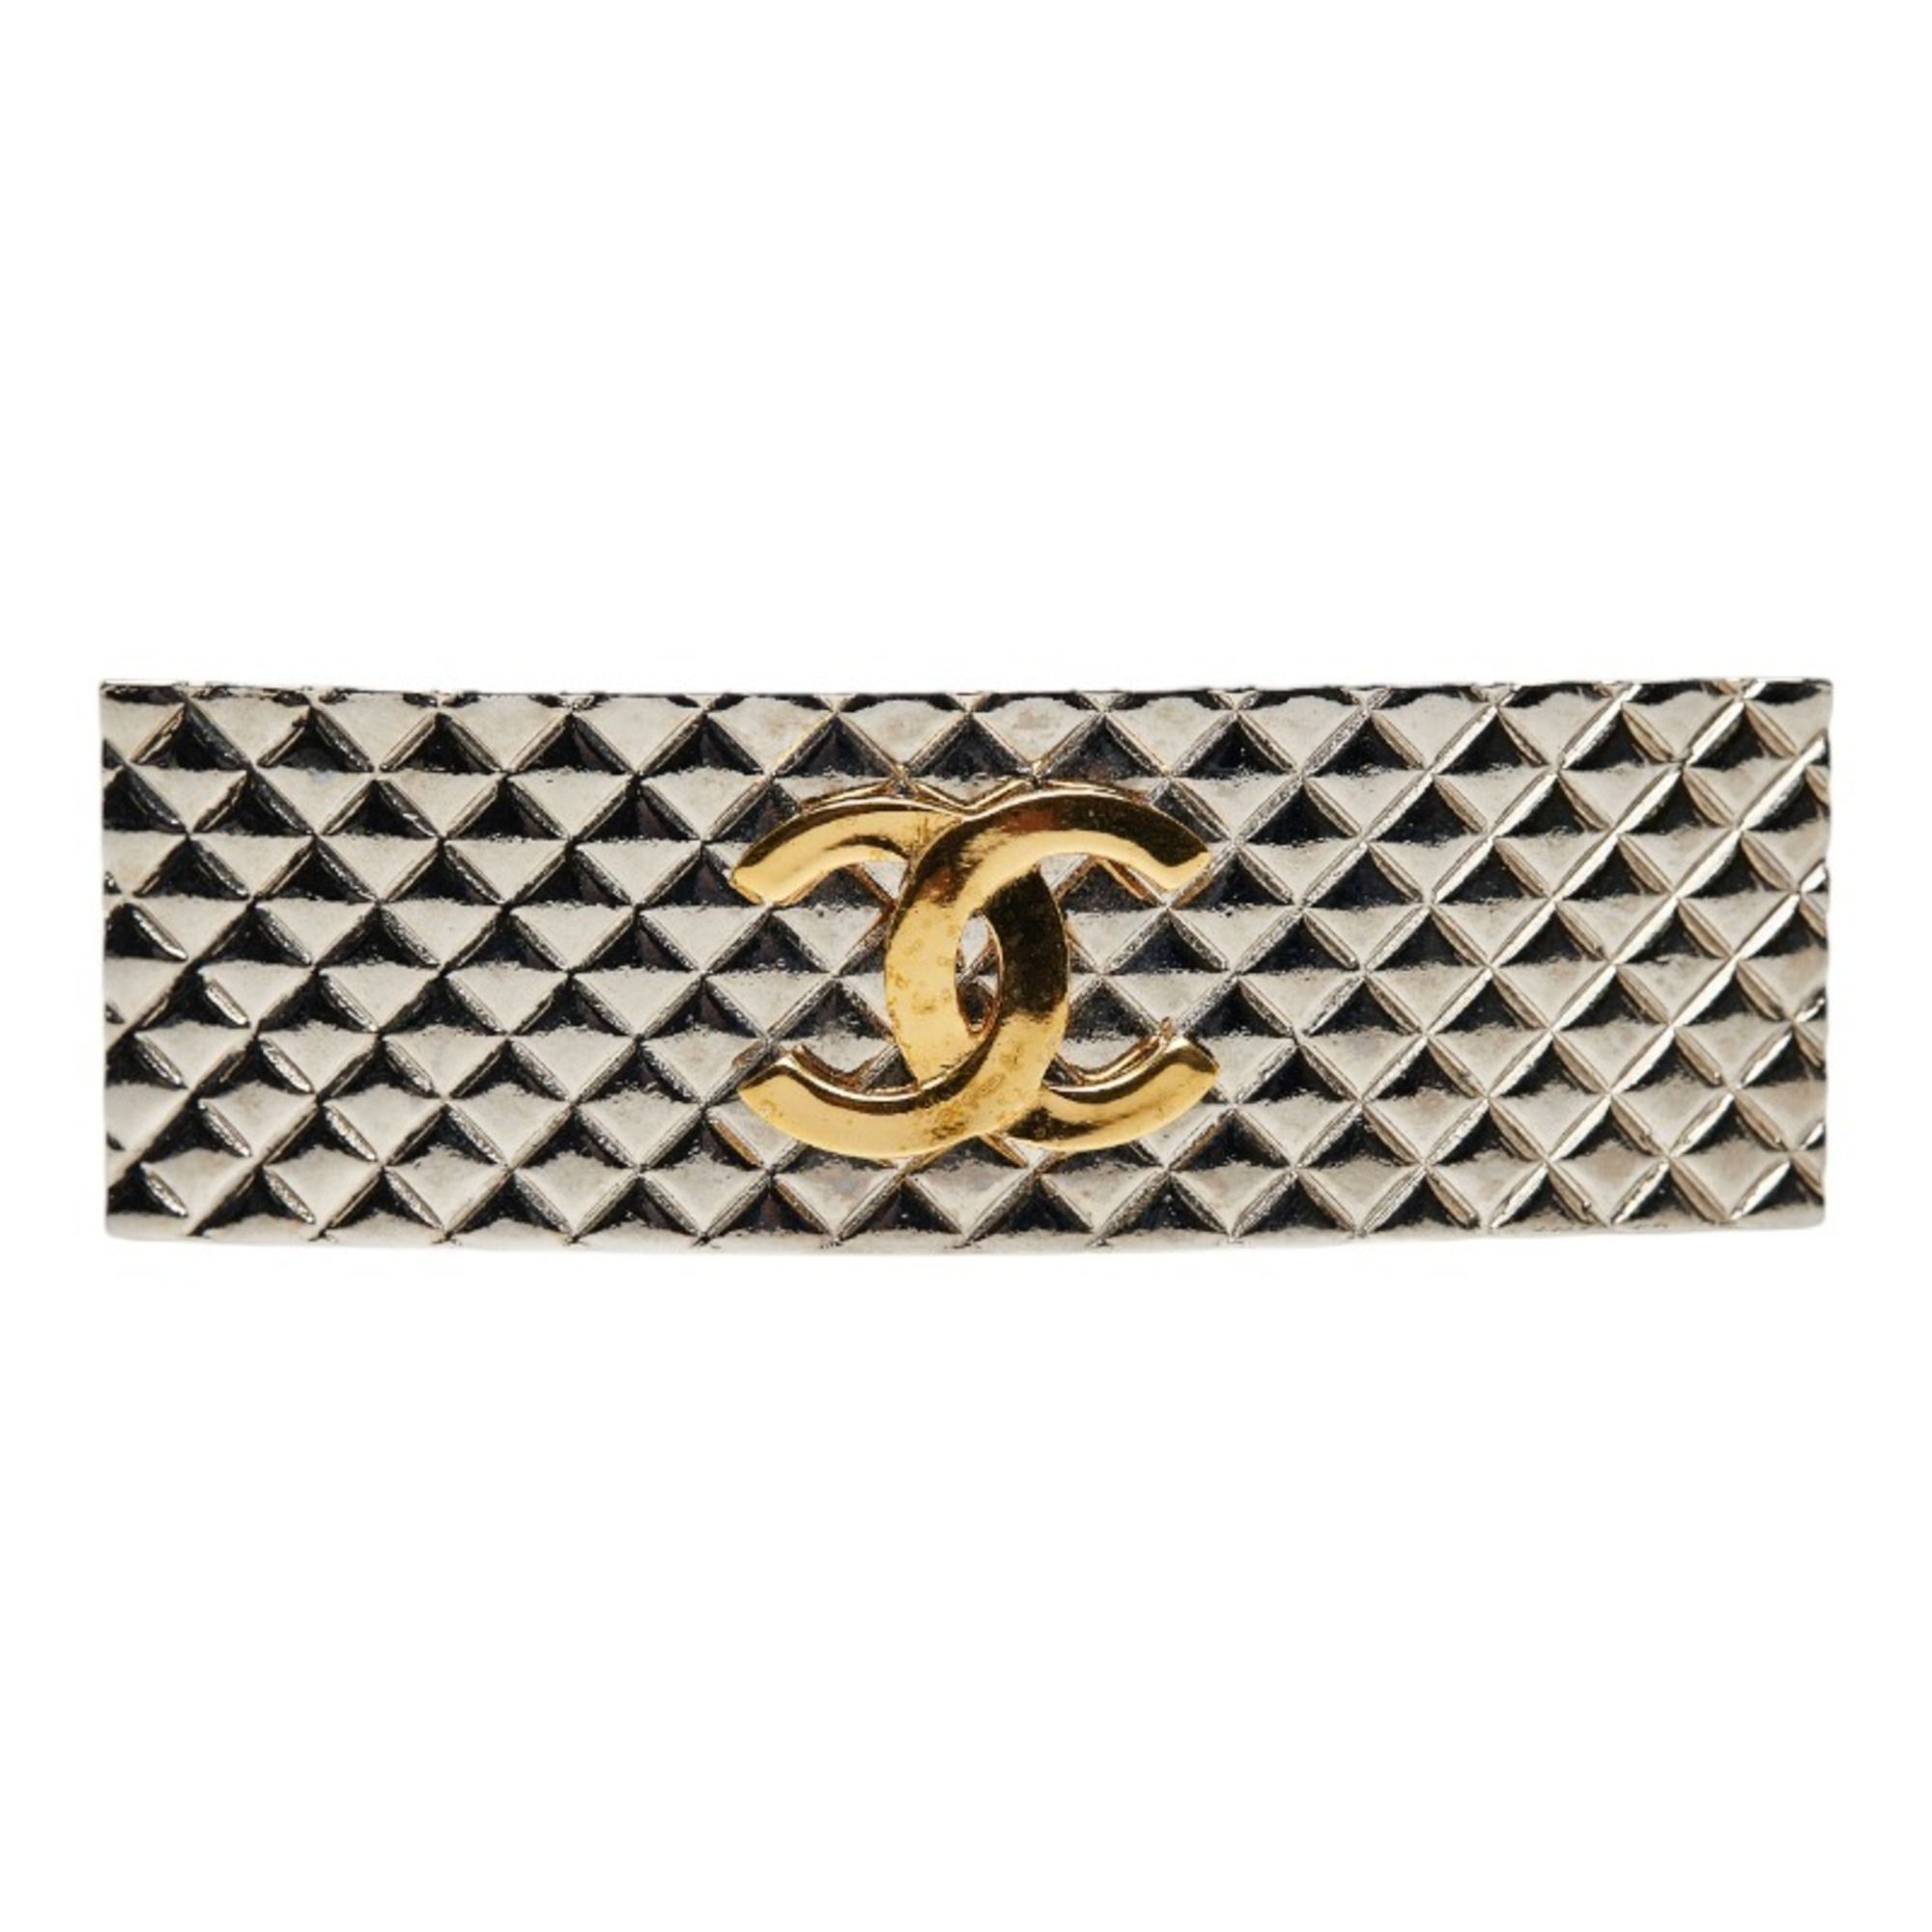 Chanel Chanel coco mark barrette silver gold plated metal ladies CHANEL